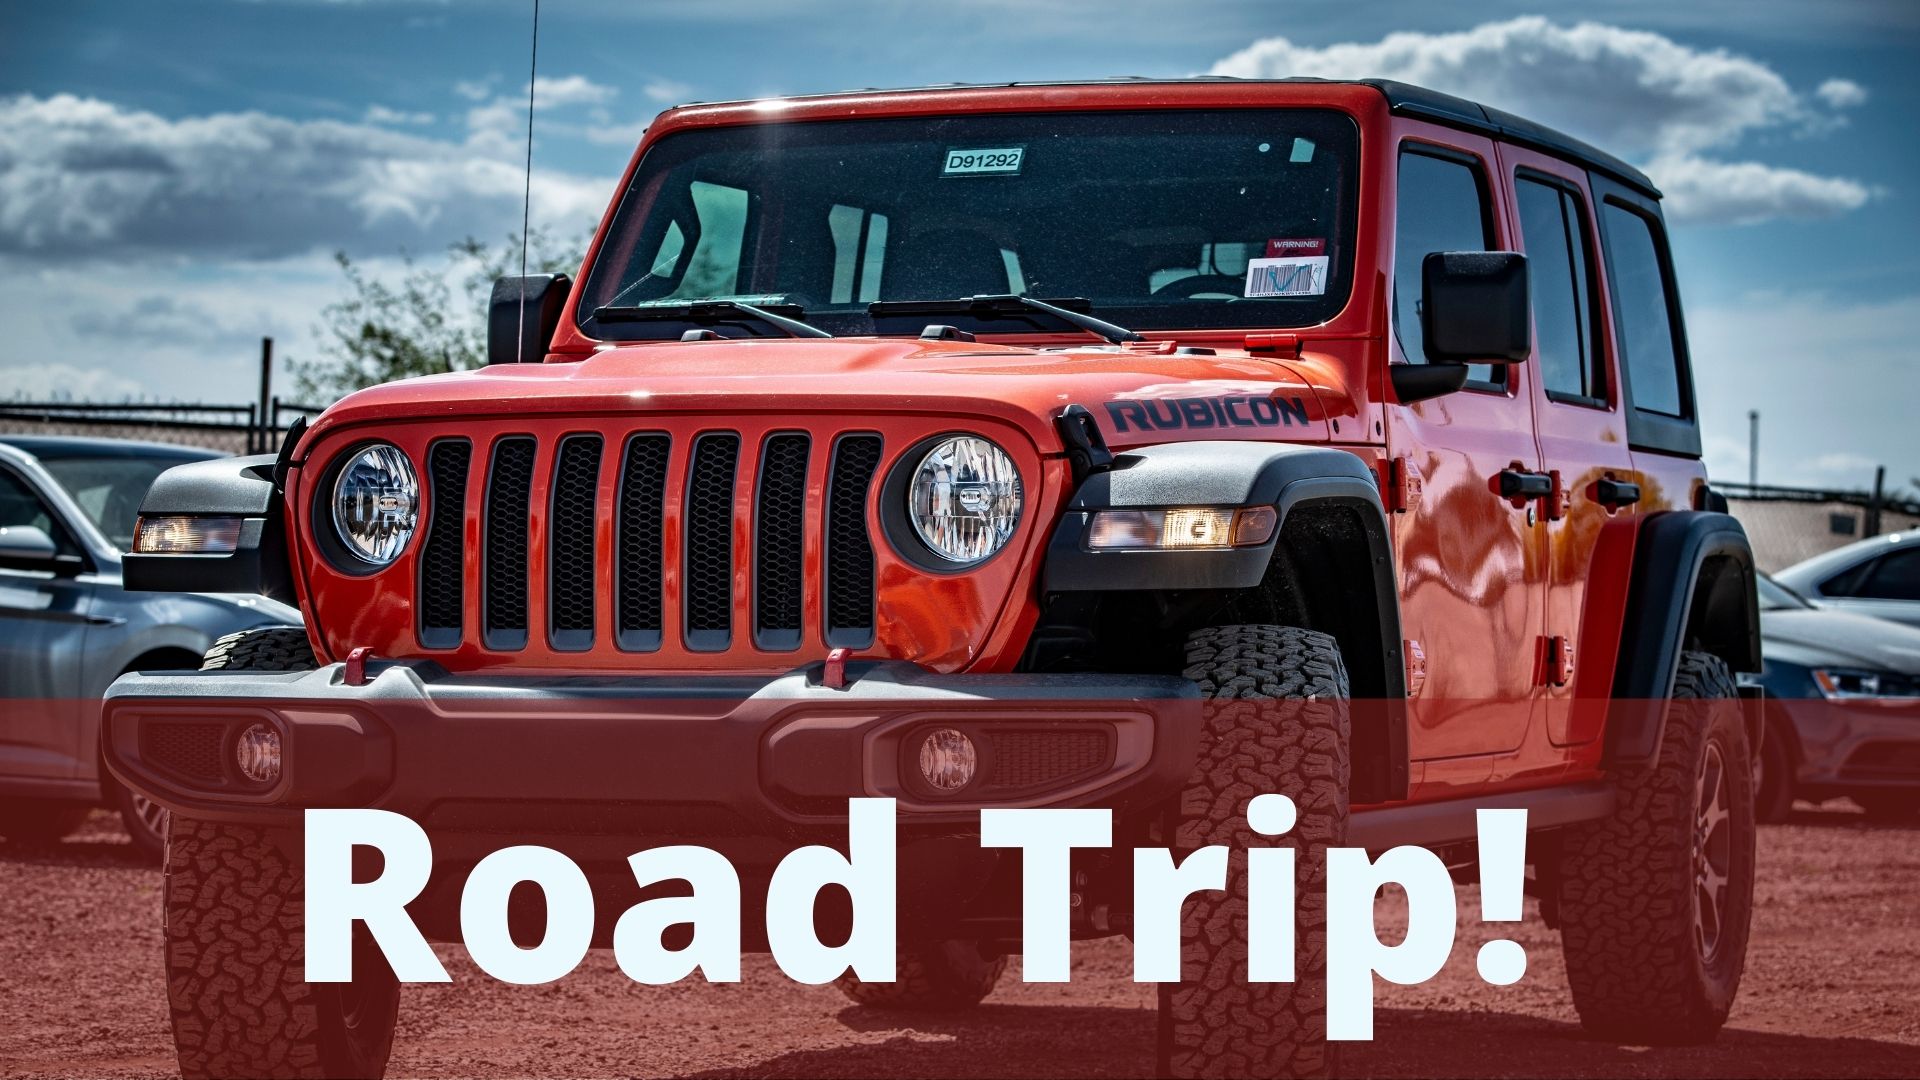 Are Jeep Wranglers Good For A Road Trip? Pros and Cons - Mom Van Up